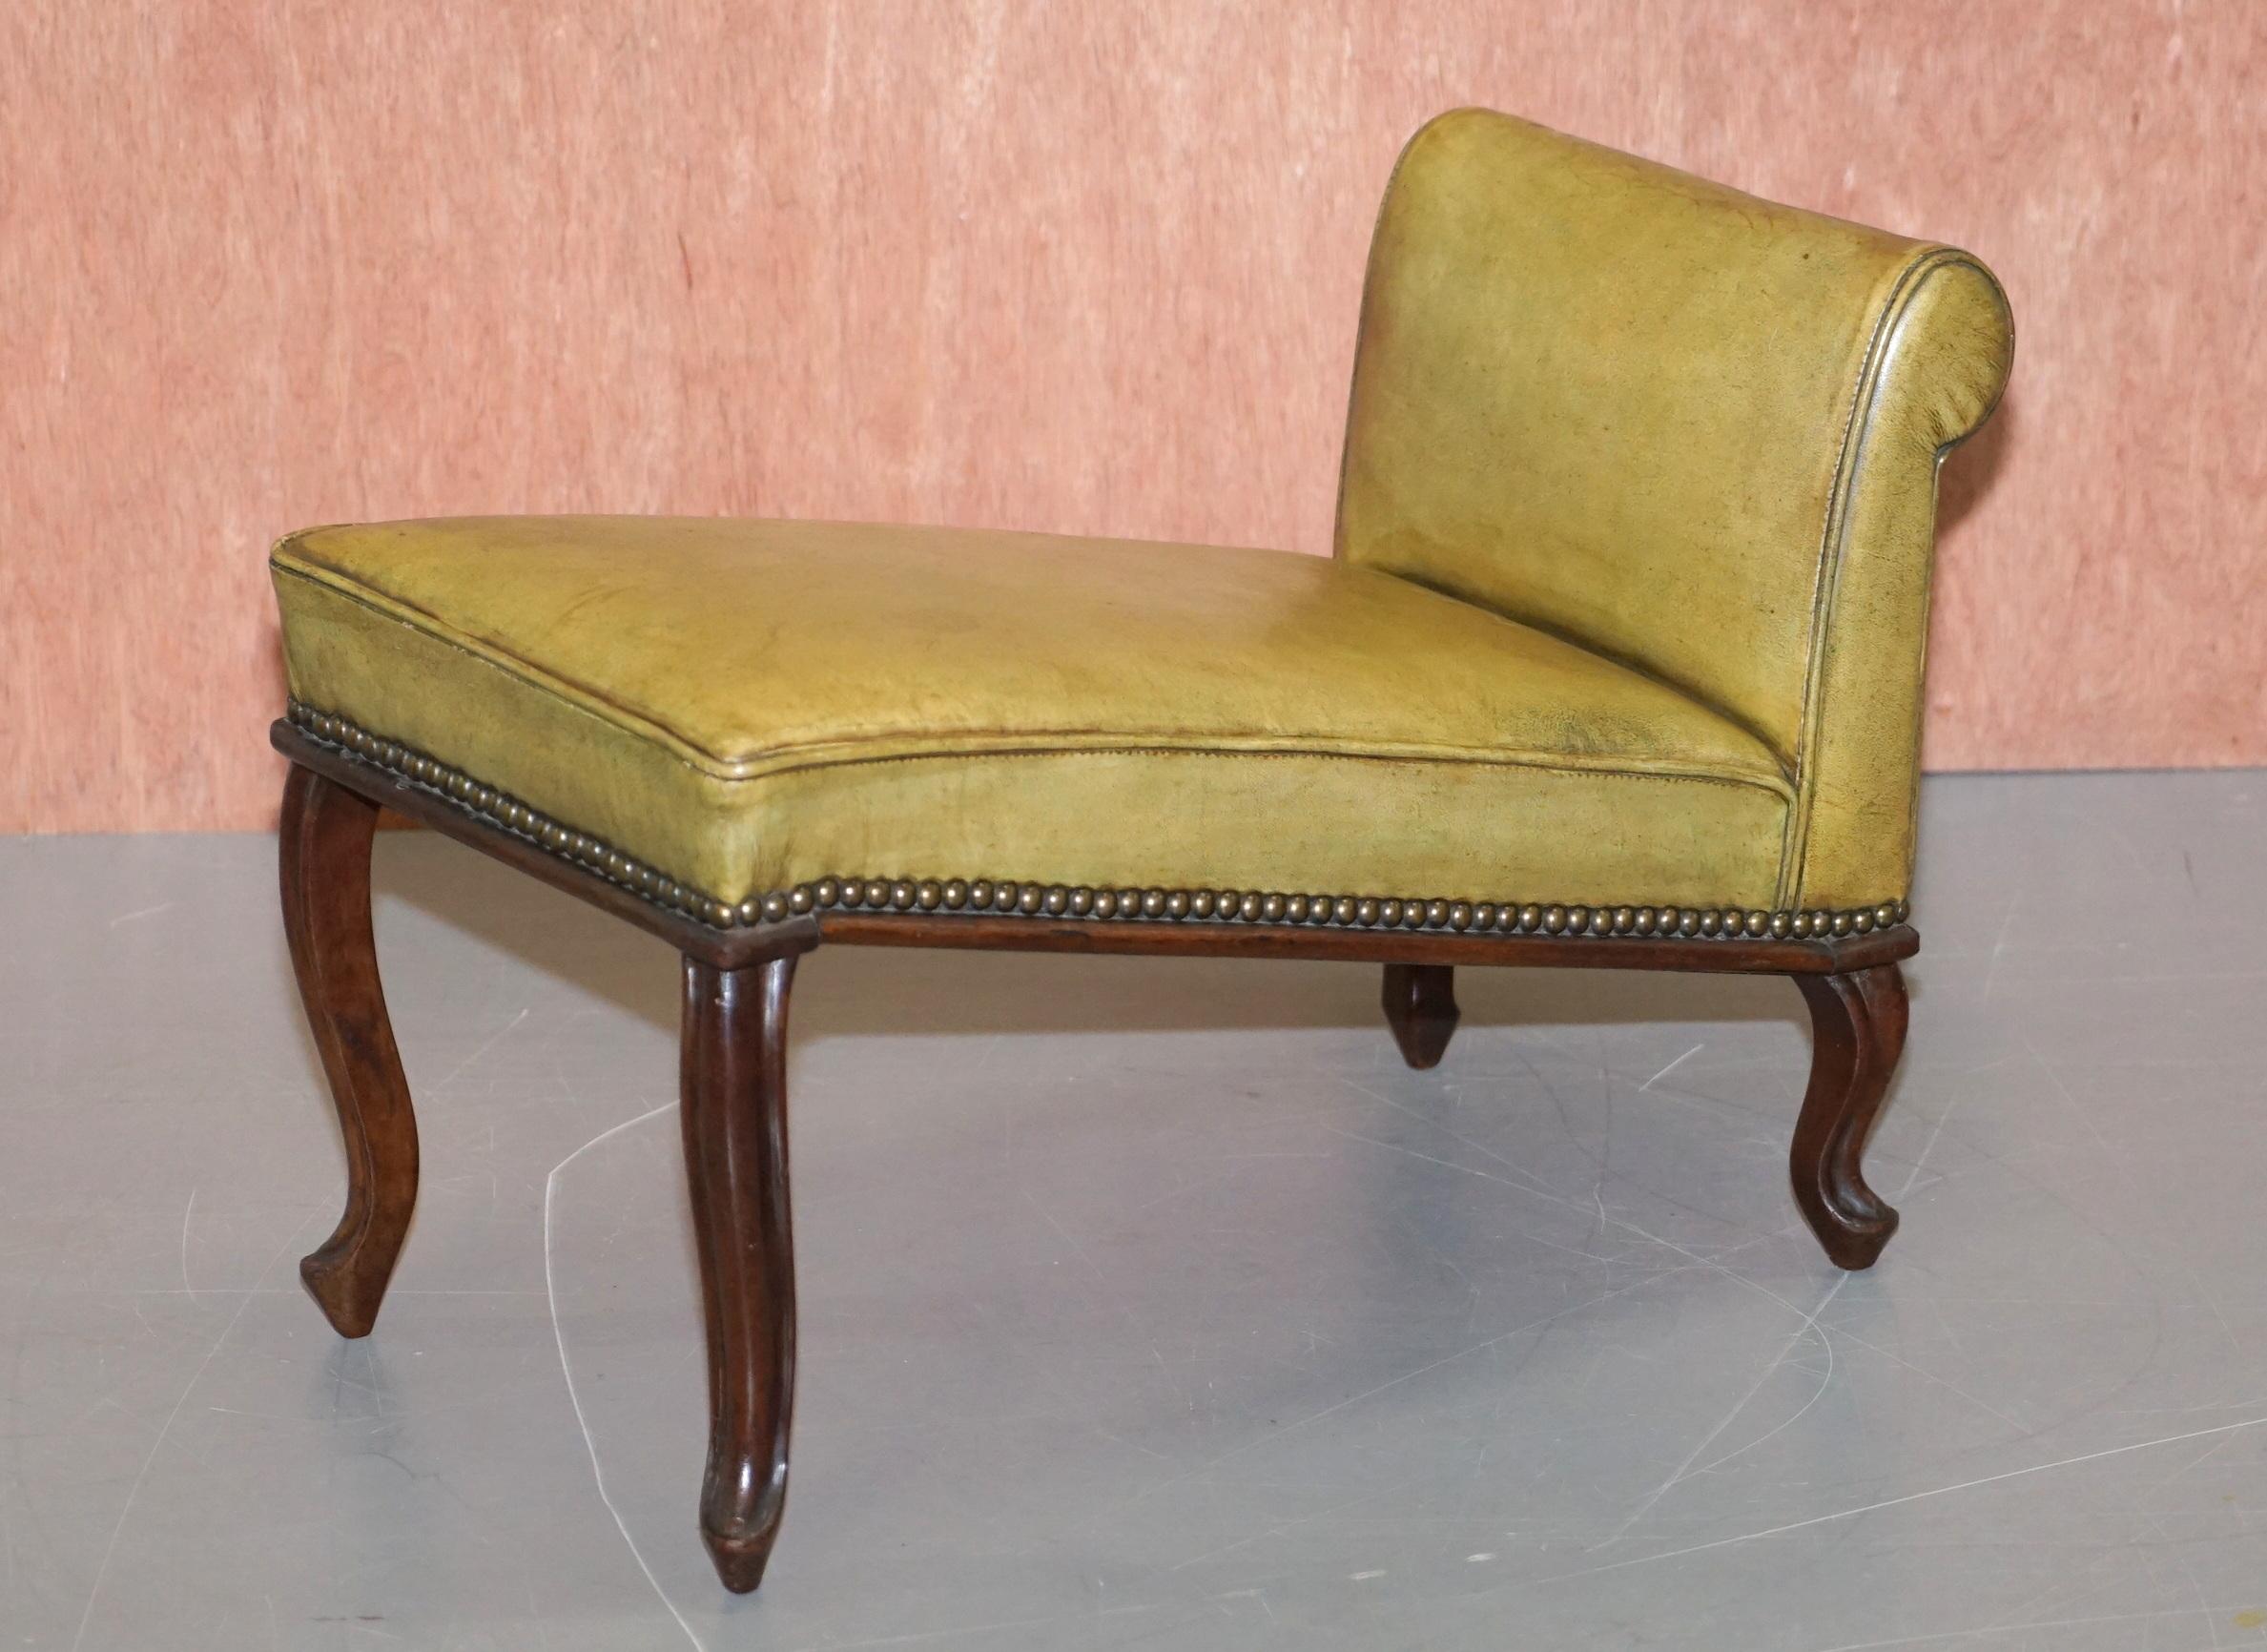 Regency circa 1815 Fluted Barrel Back Leather Wing Armchair and Matching Stool For Sale 7